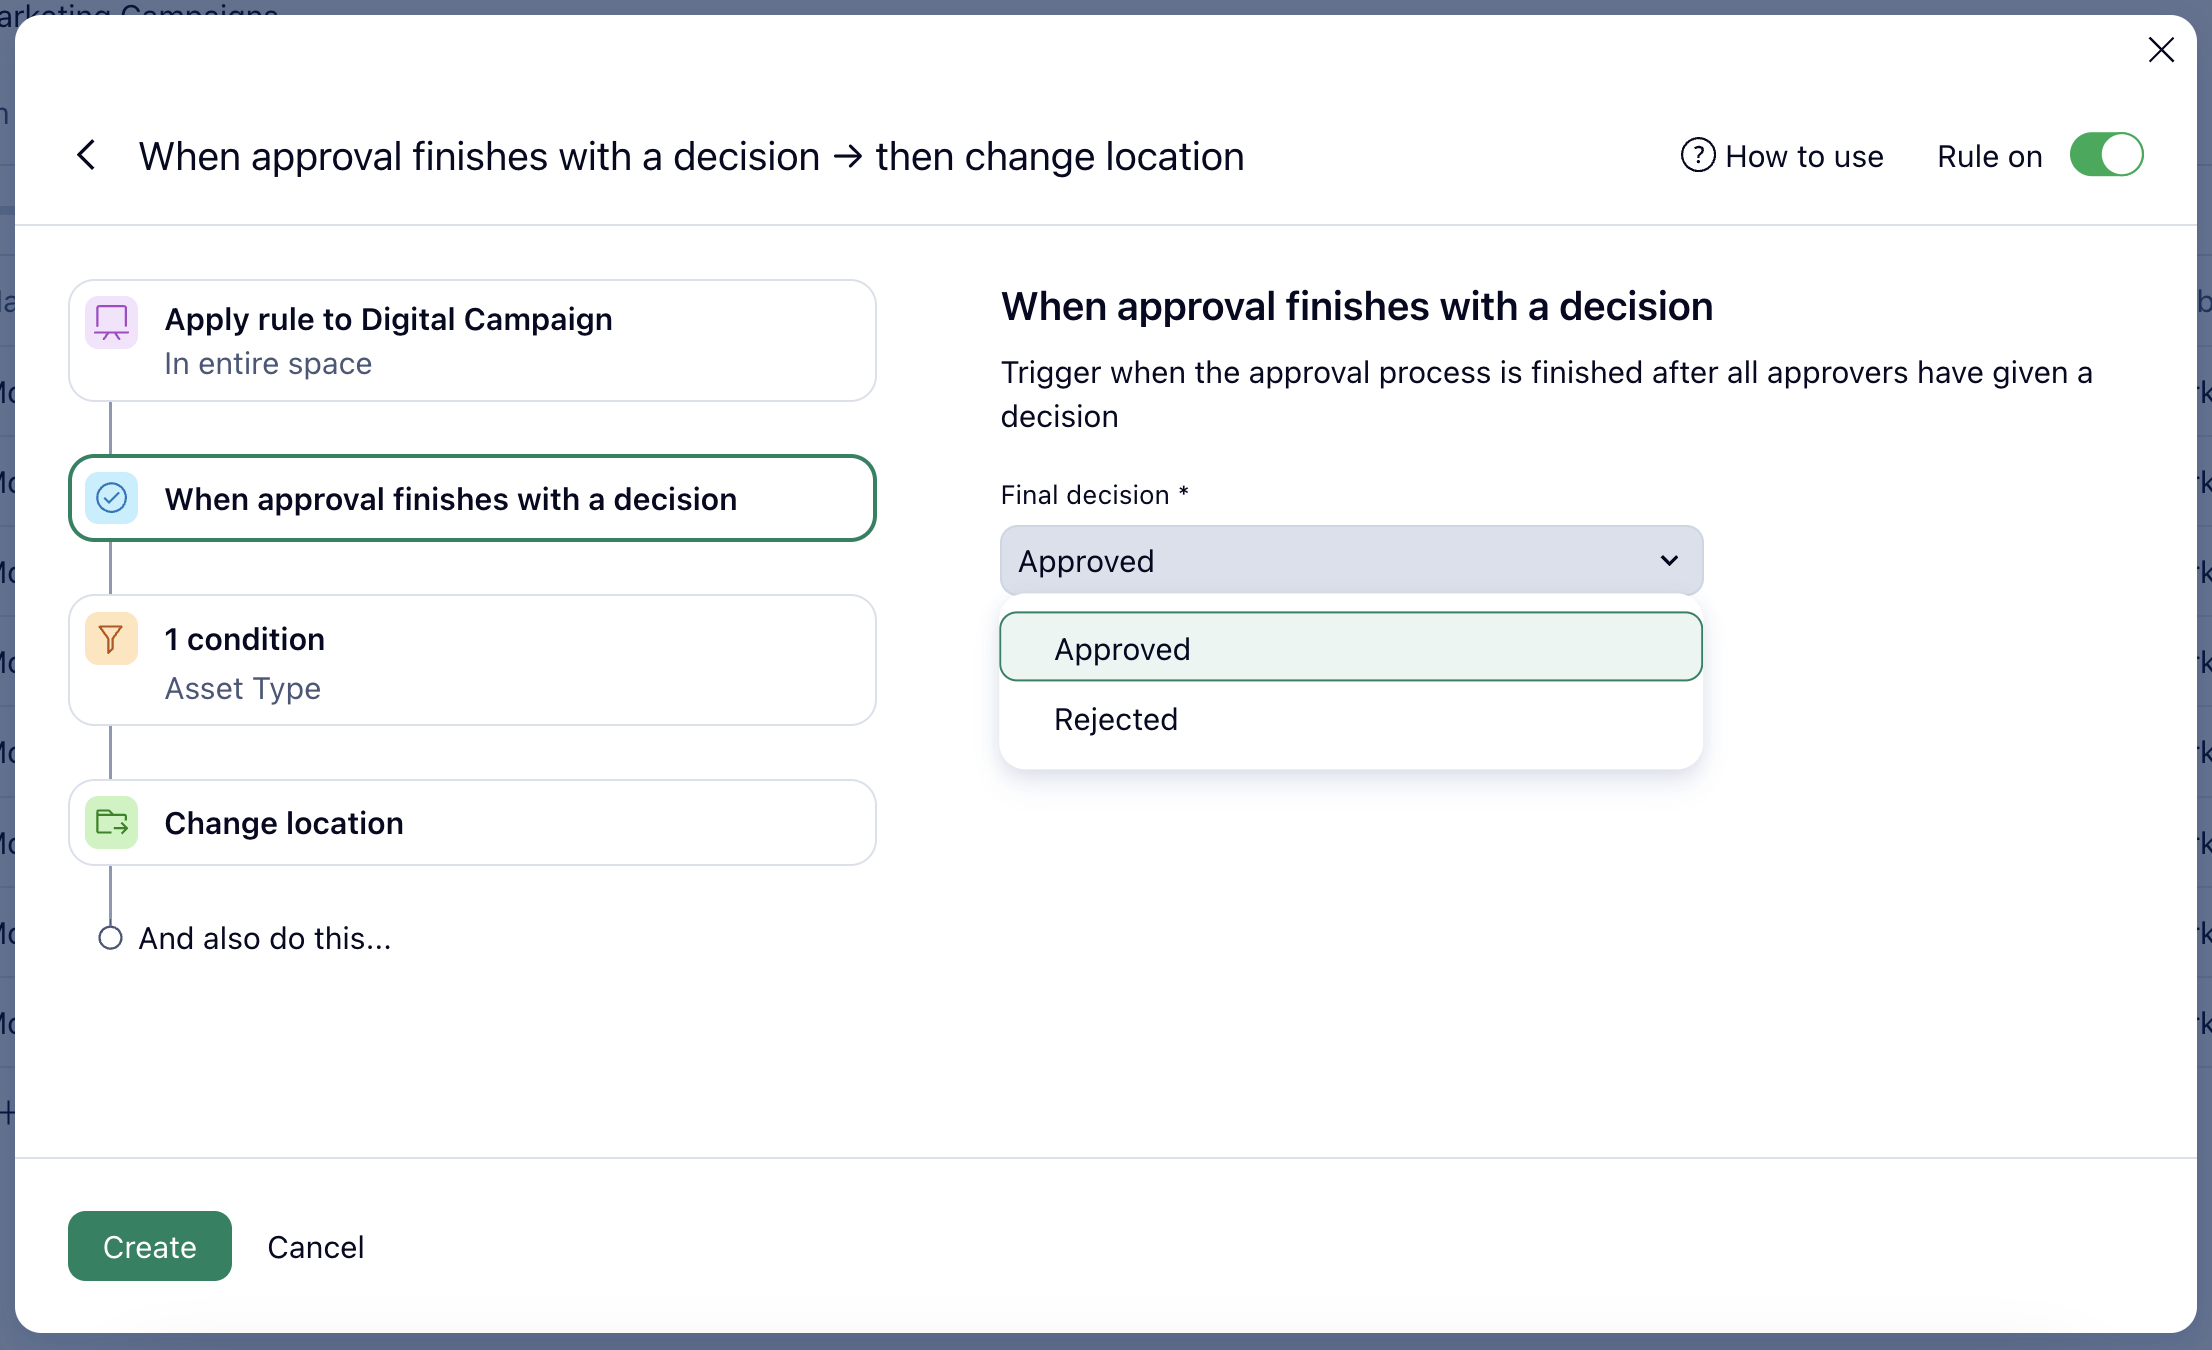 A screenshot of creating an automation rule based an on approval decision in Wrike